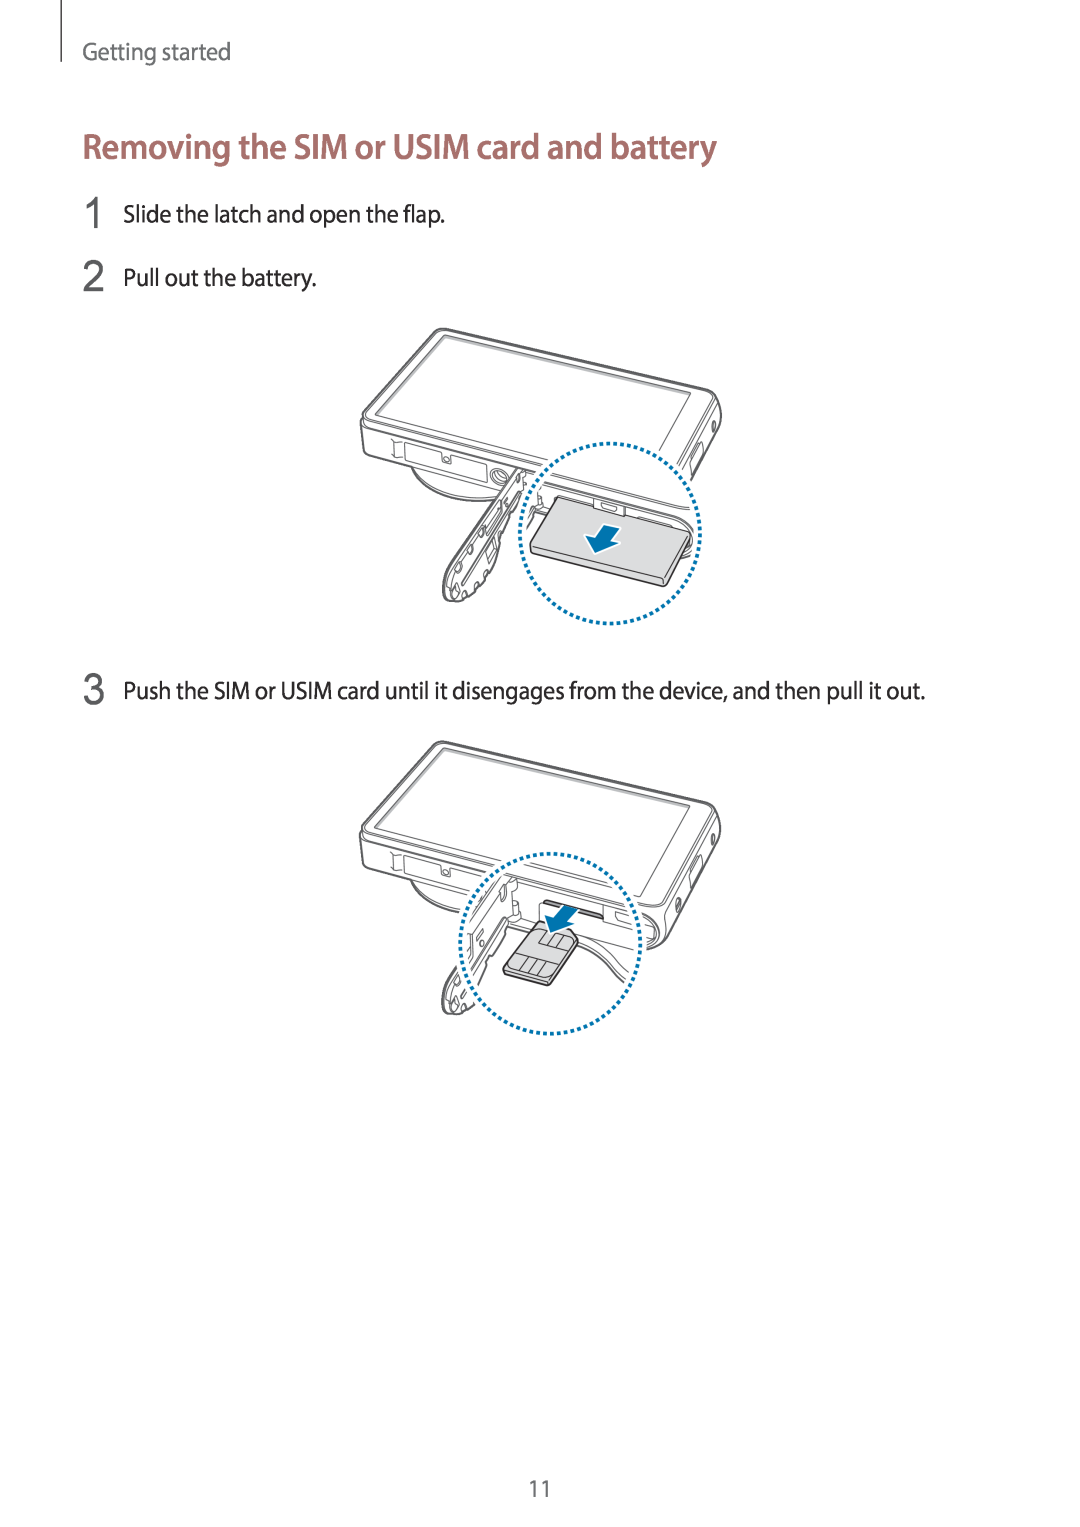 Samsung EK-GC100 user manual Removing the SIM or USIM card and battery, Getting started 